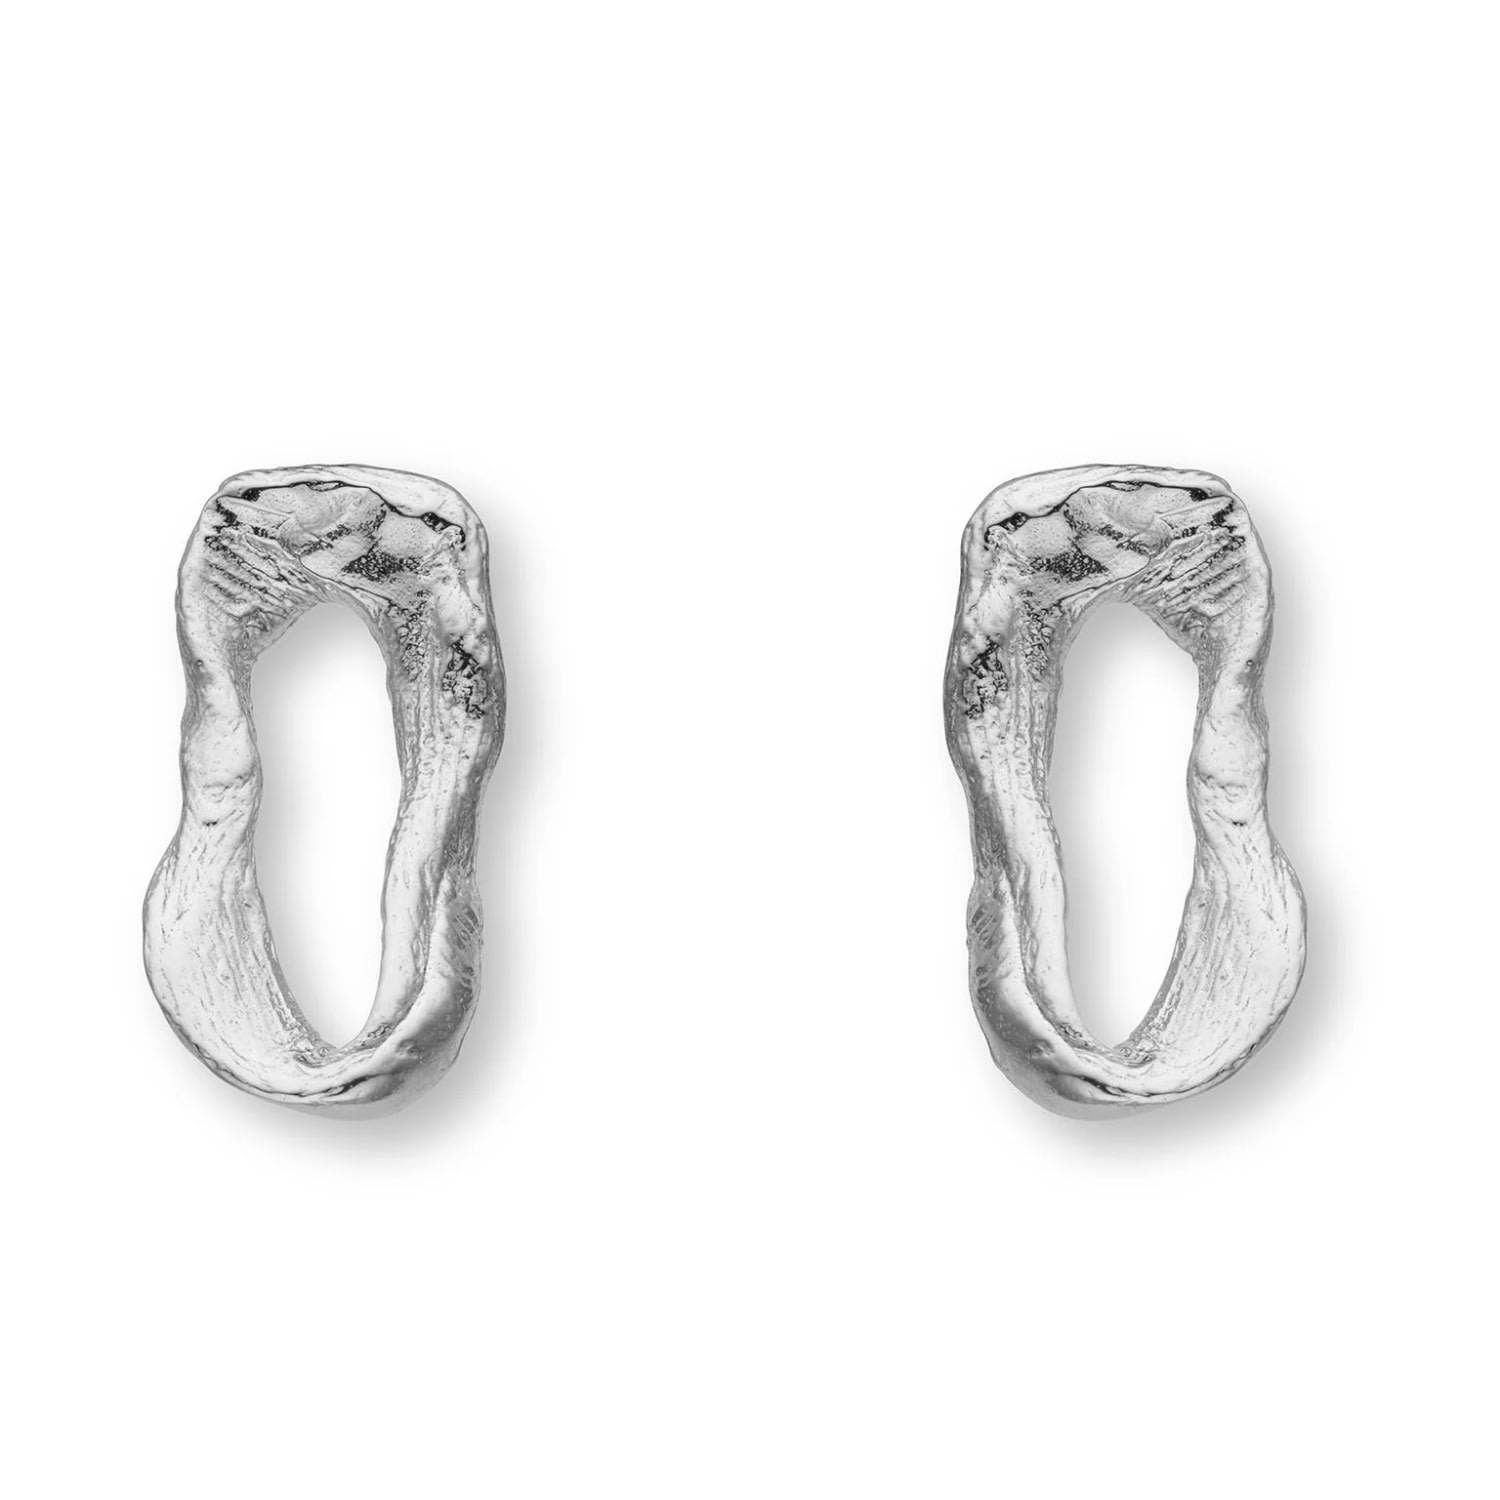 Eva Remenyi Women's Vacation Small Chain Earrings Silver